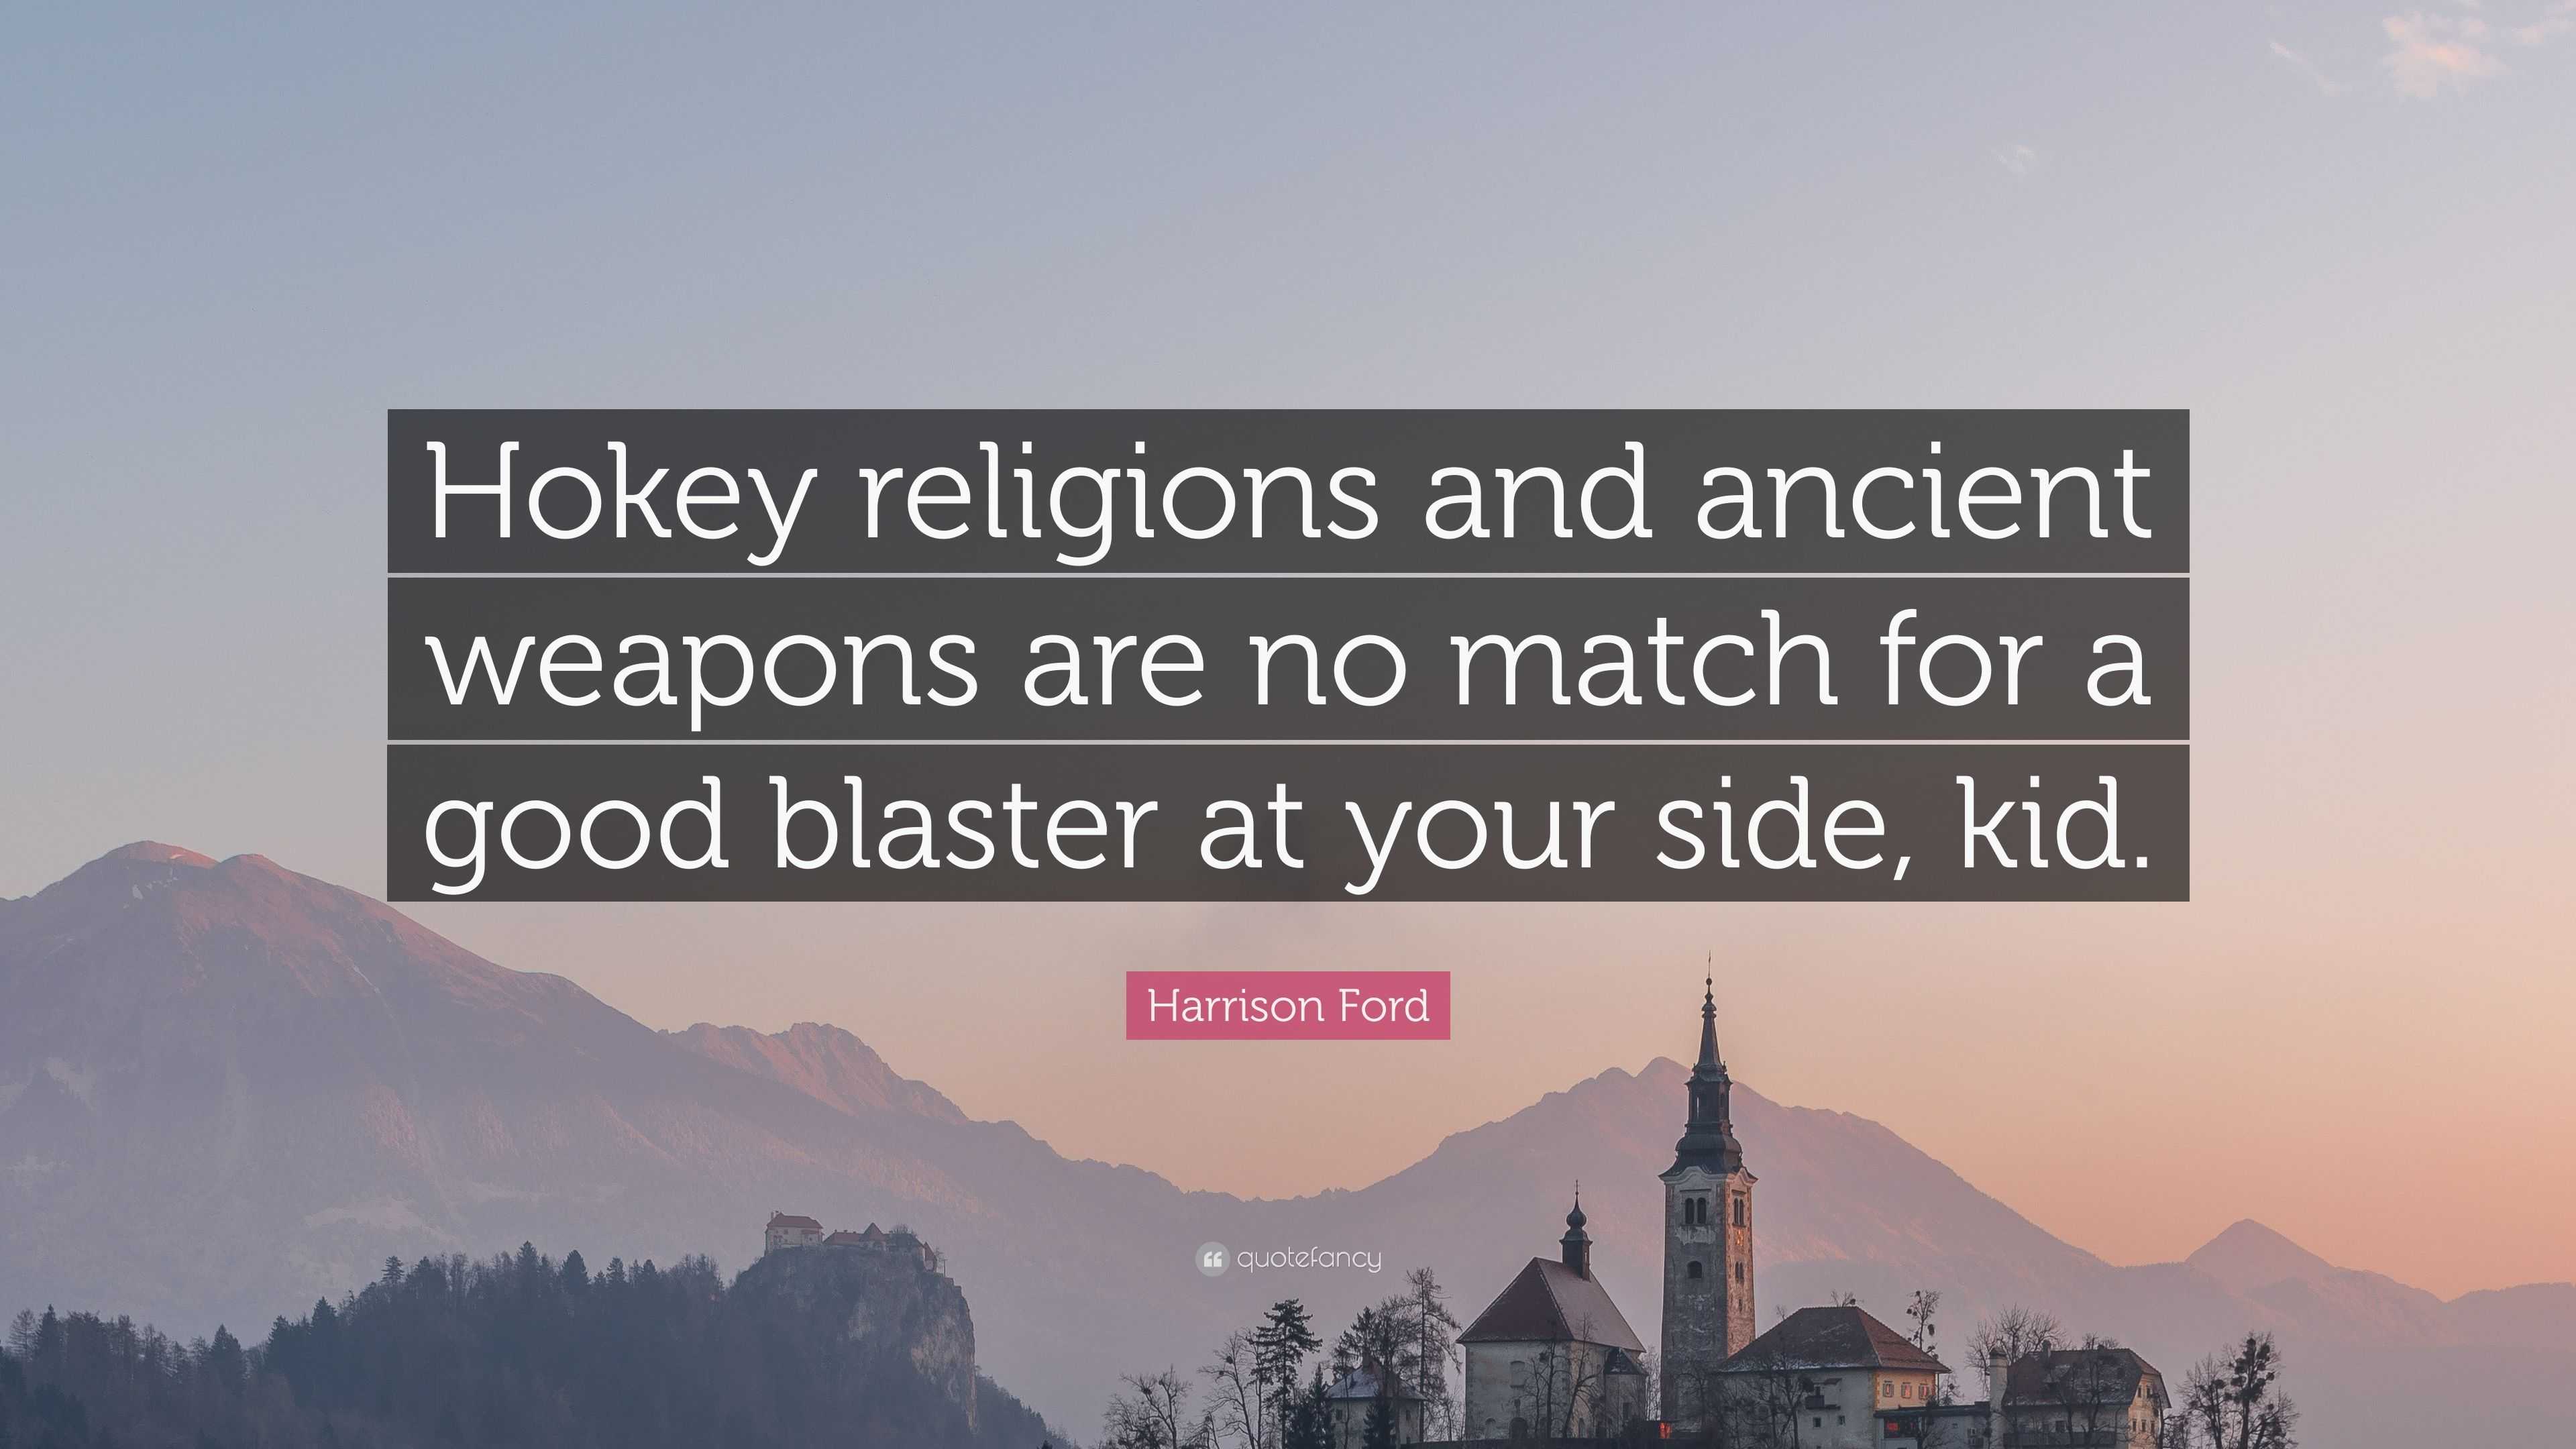 Harrison Ford Quote Hokey Religions And Ancient Weapons Are No Match For A Good Blaster At